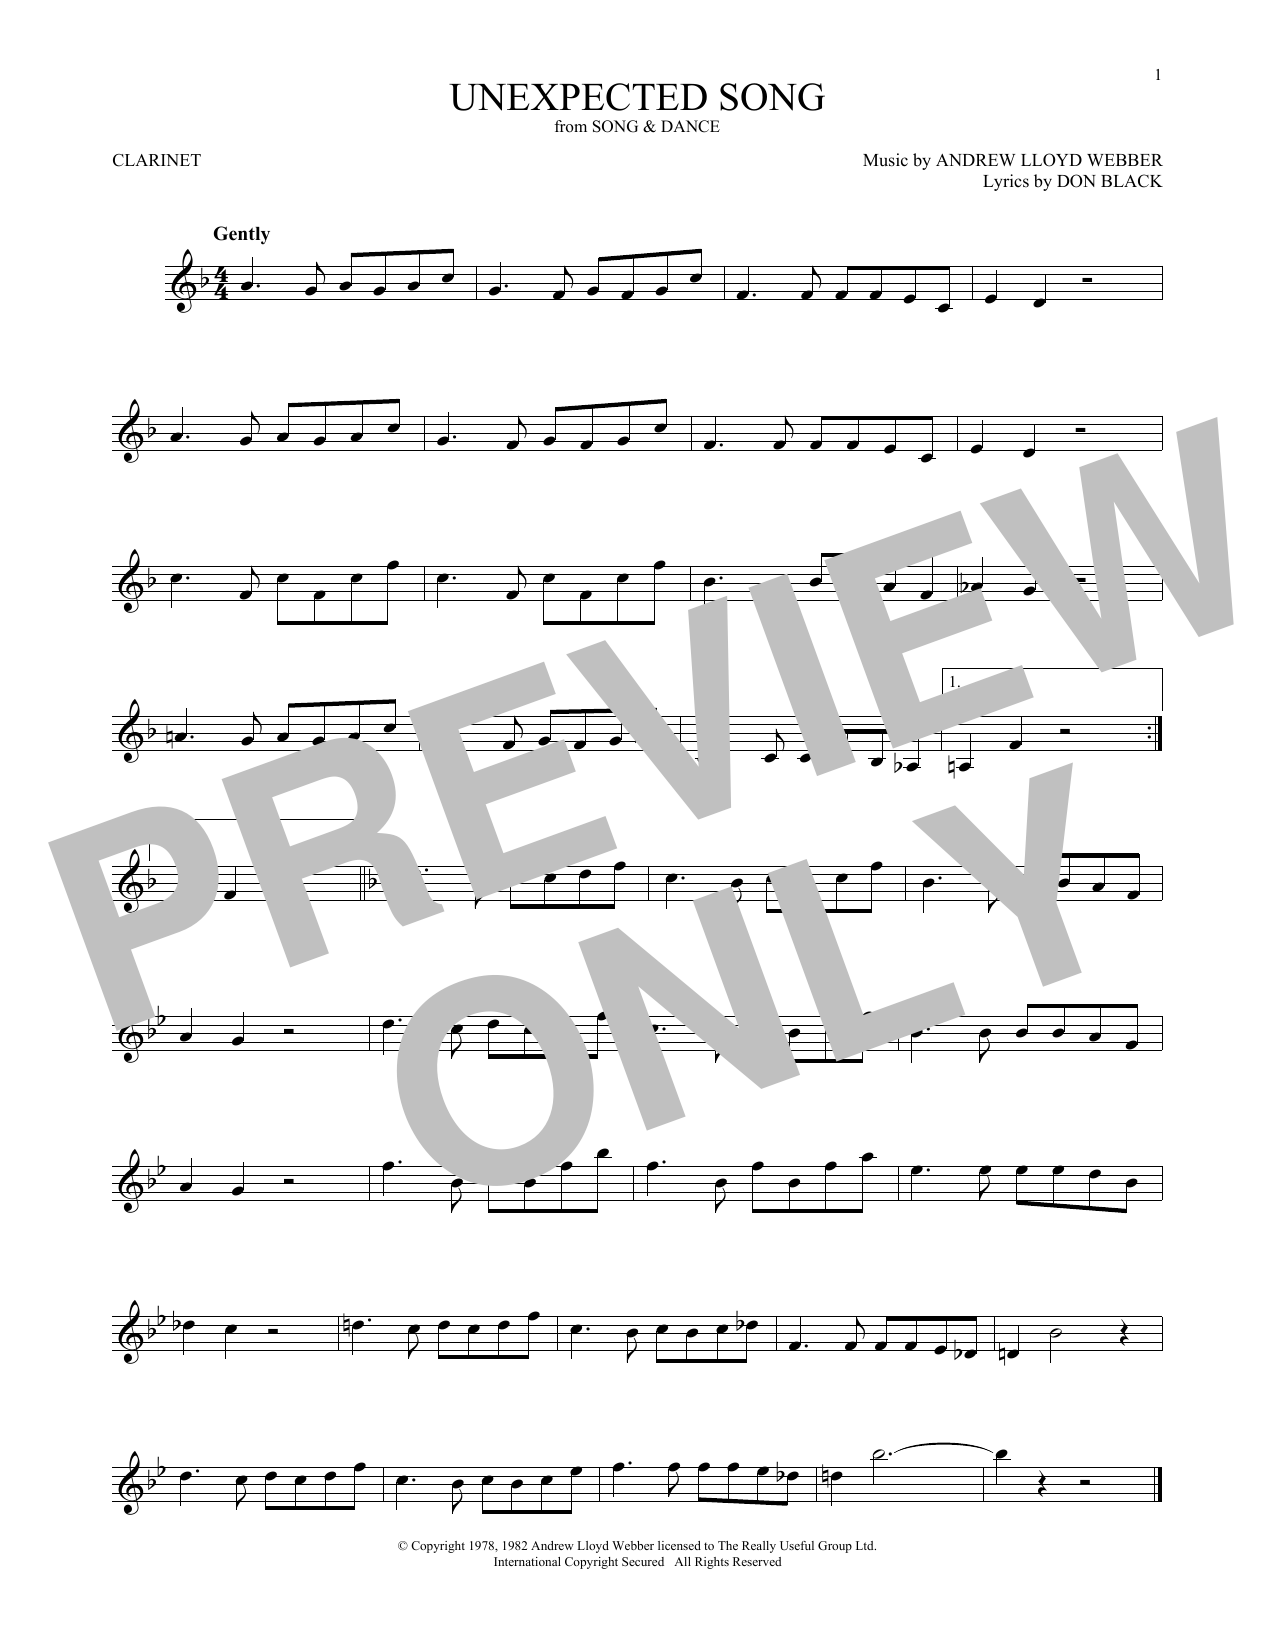 Download Bernadette Peters Unexpected Song (from Song & Dance) Sheet Music